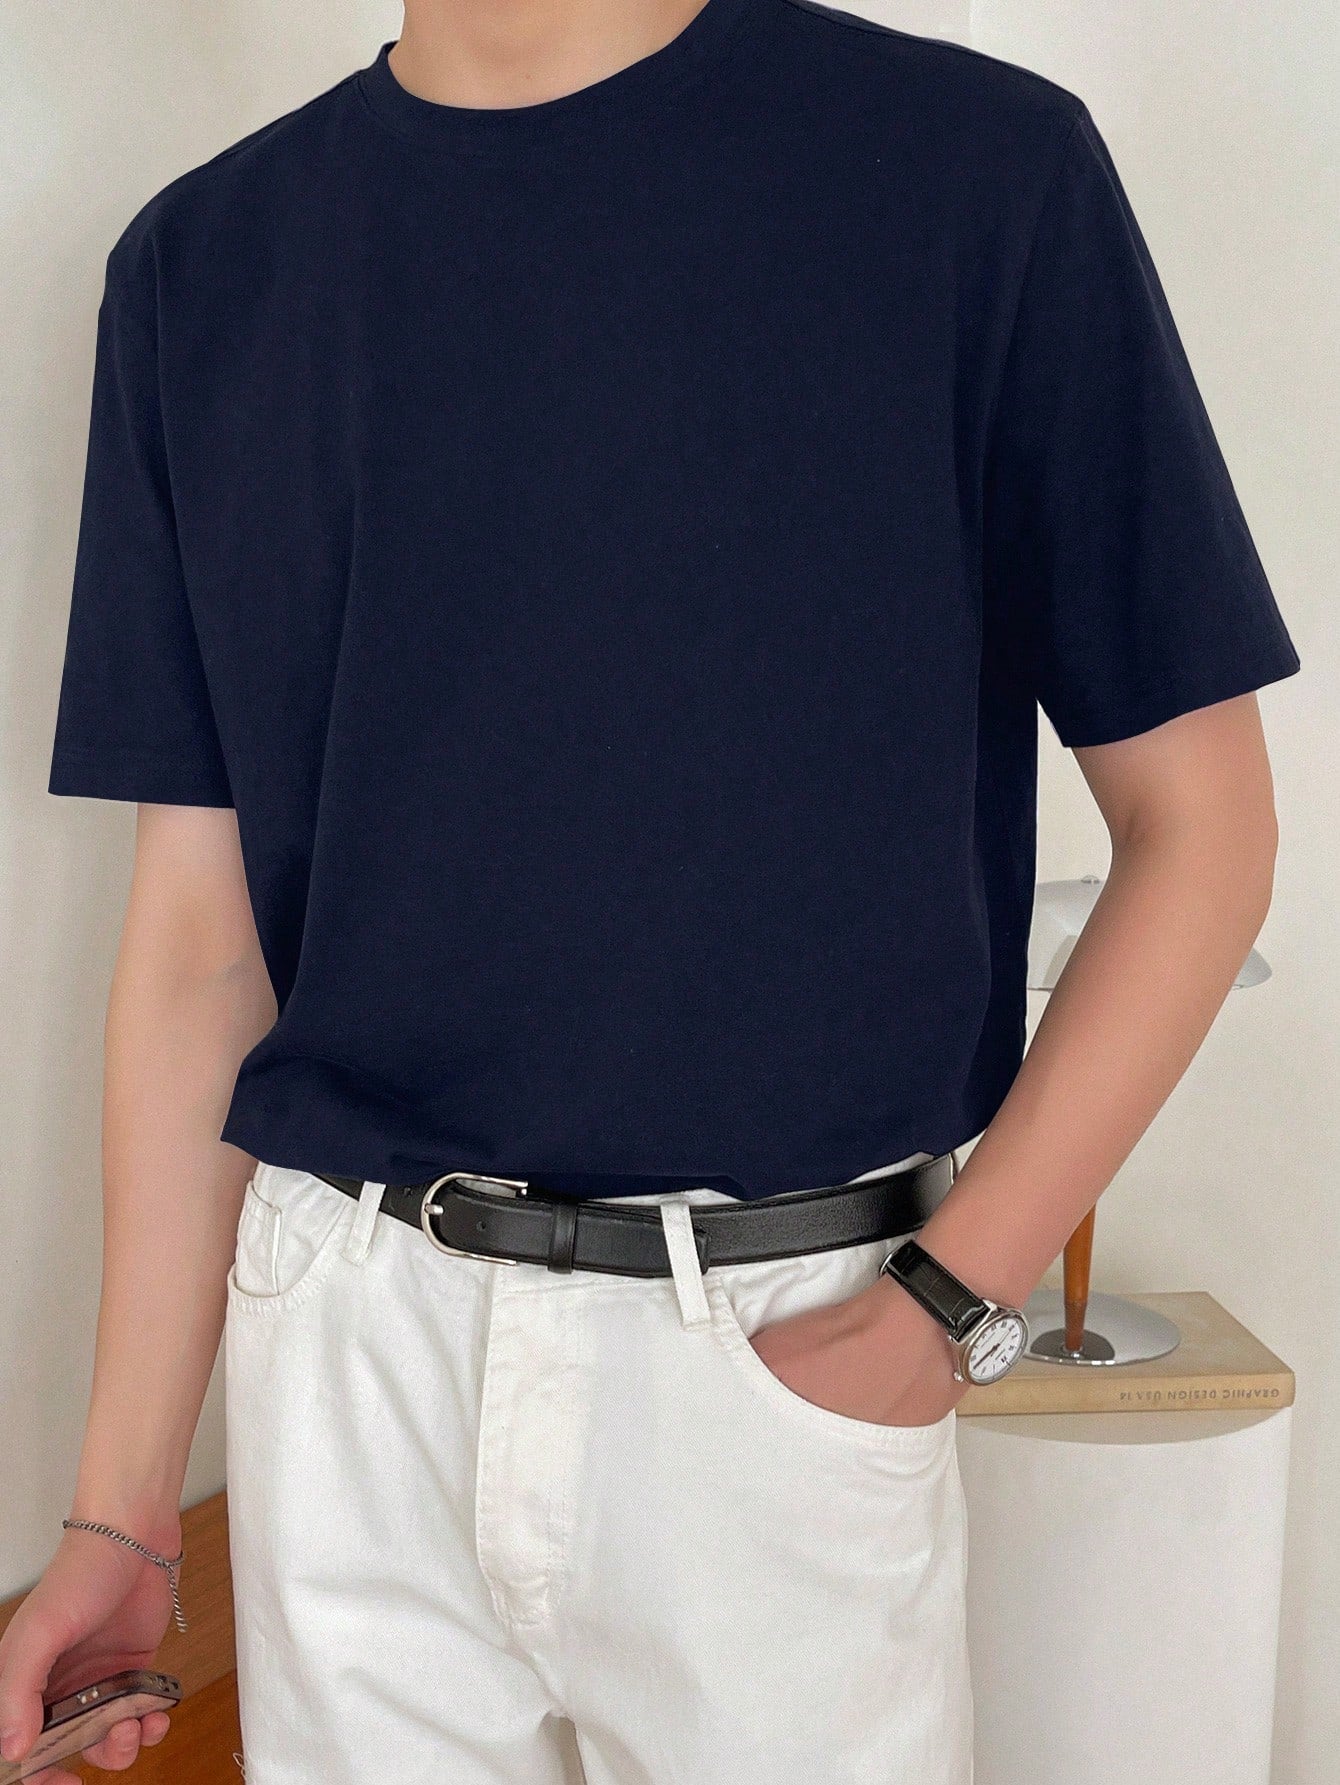 Men's Solid Color Round Neck Short Sleeve Sports T-Shirt For Summer Casual Wear